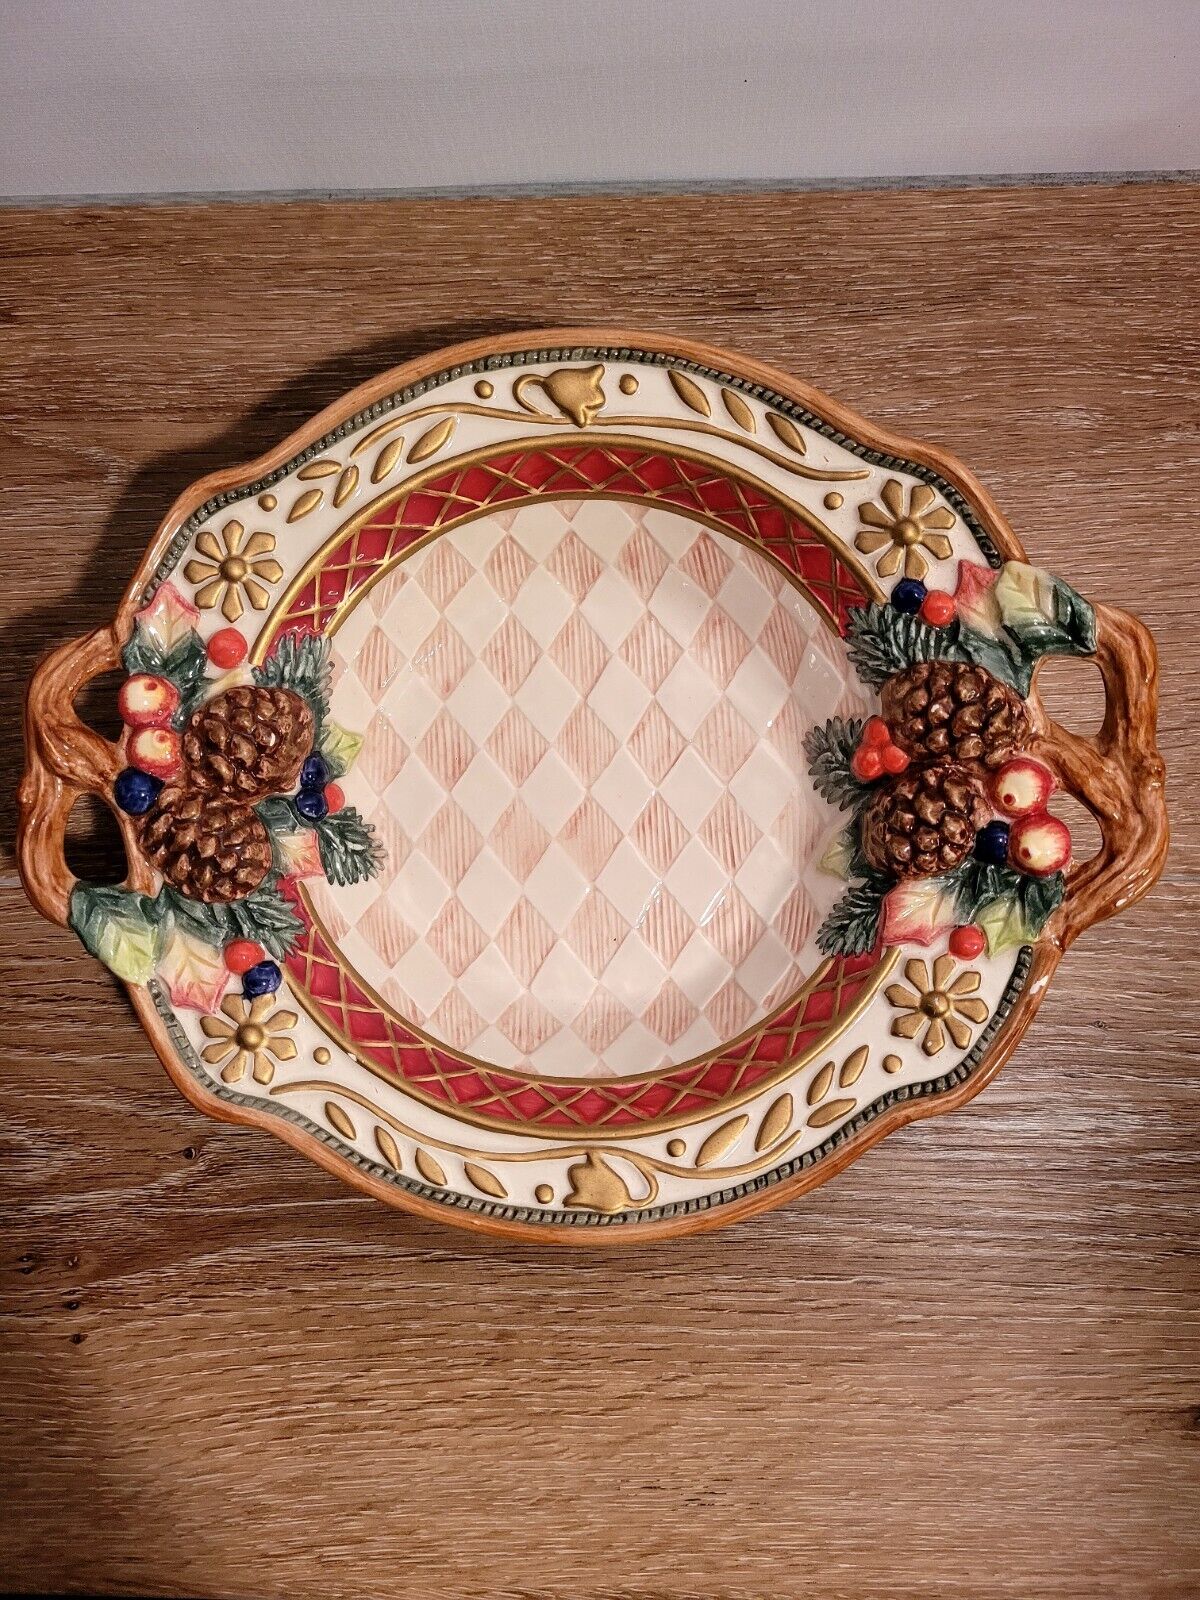 Vintage Fitz and Floyd Oval Serving Bowl Decorative Pinecone Home Collection 